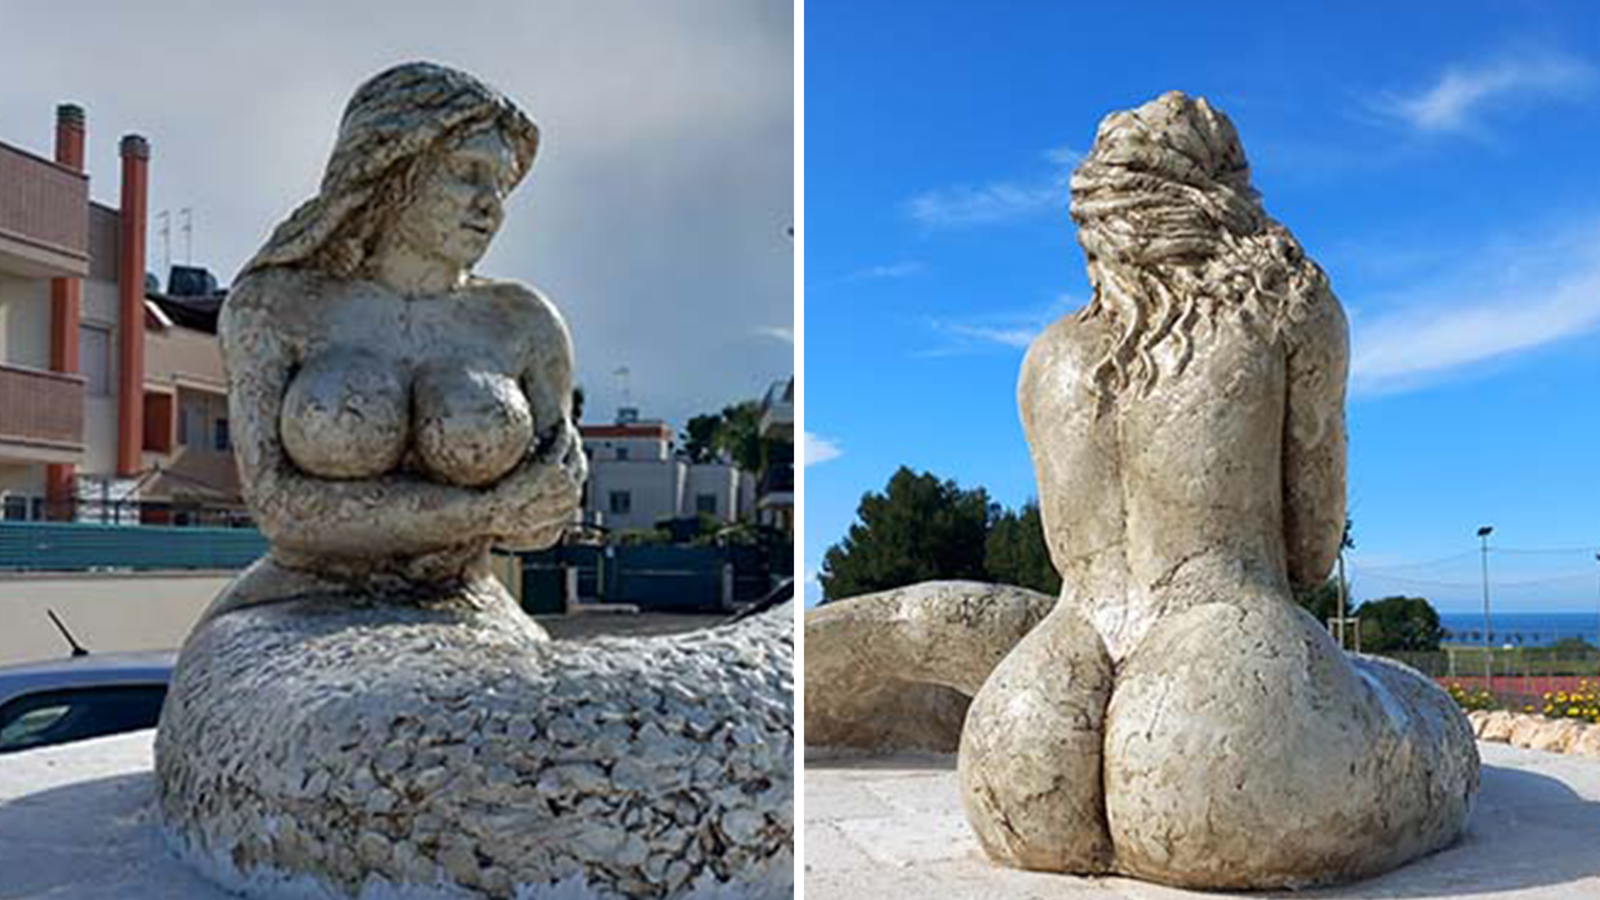 Provocative mermaid statue makes waves in southern Italian town